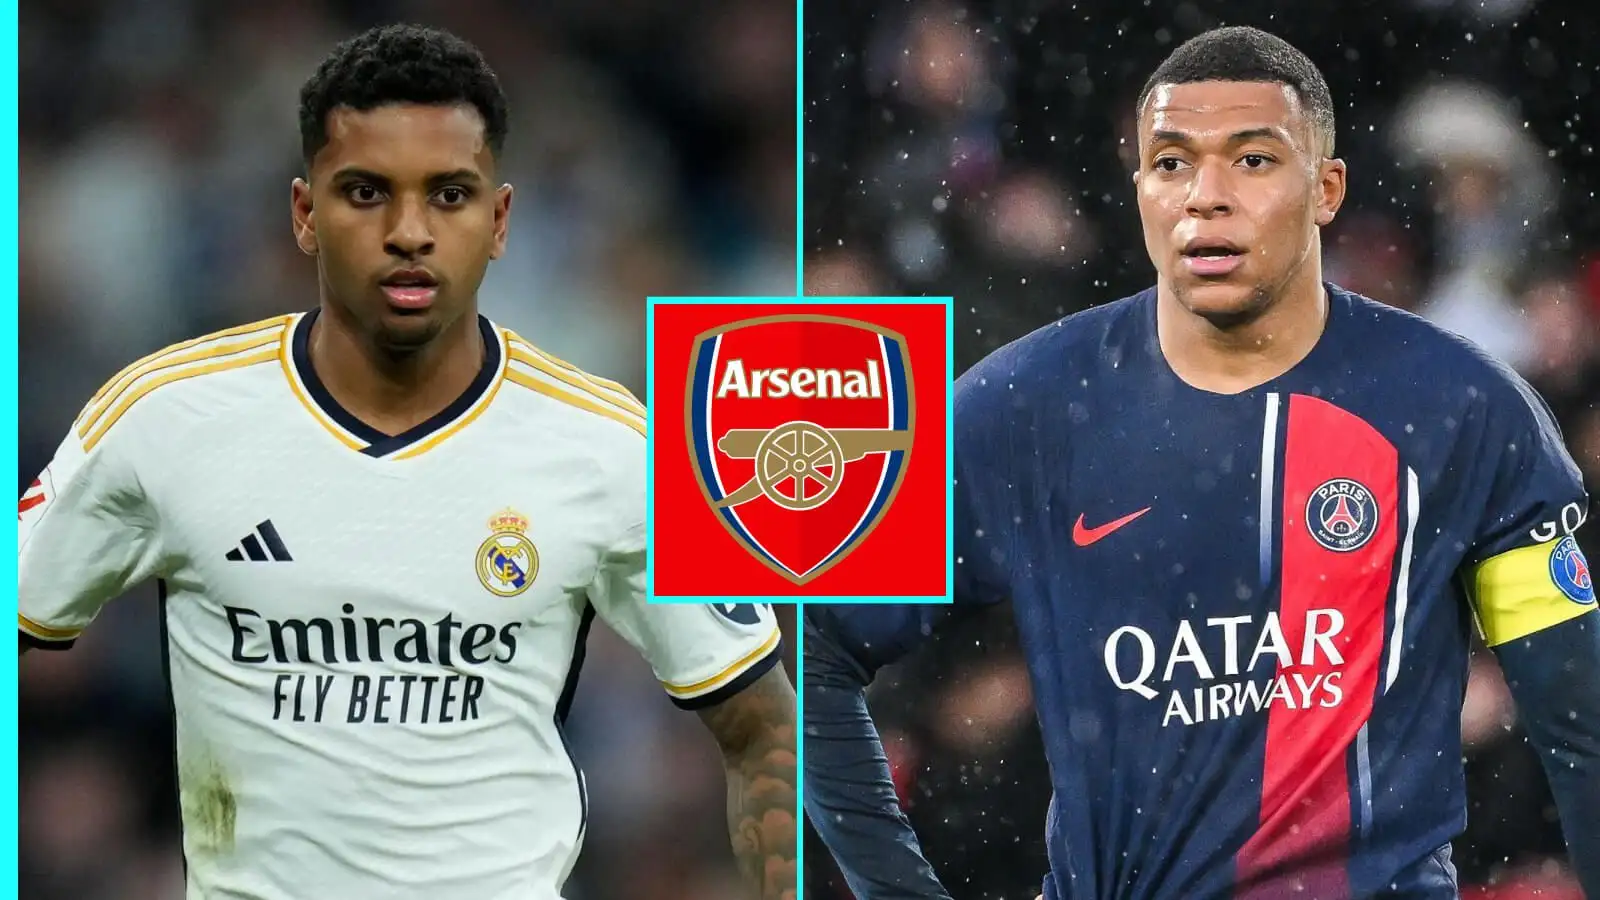 Arsenal-attached winger Rodrygo might disclaim Real Madrid if Kylian Mbappe joins.